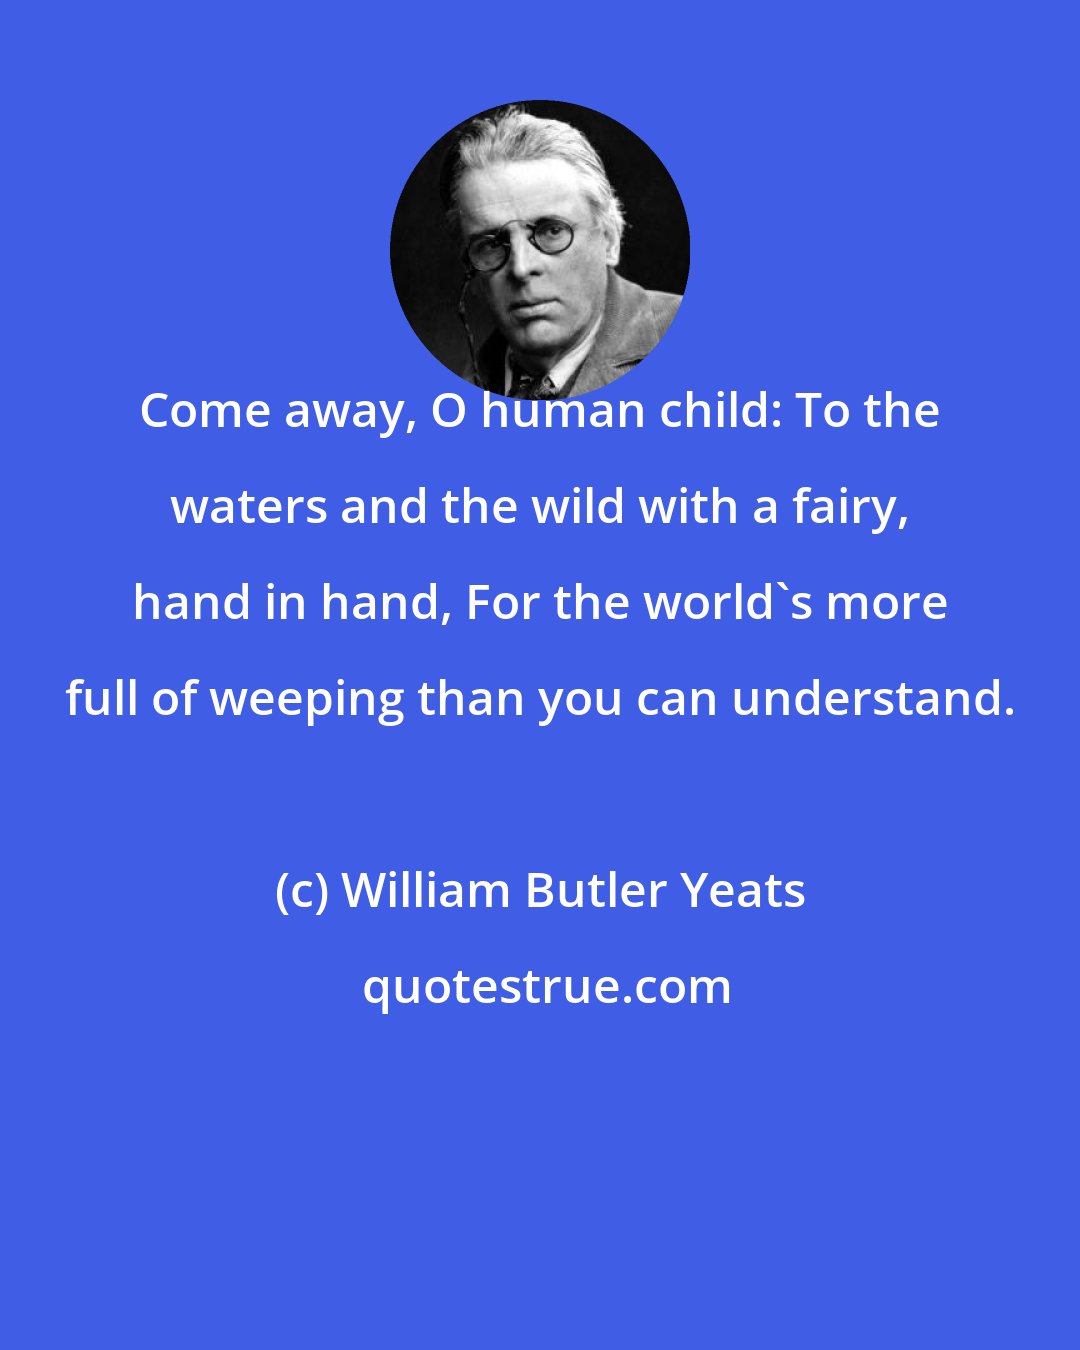 William Butler Yeats: Come away, O human child: To the waters and the wild with a fairy, hand in hand, For the world's more full of weeping than you can understand.